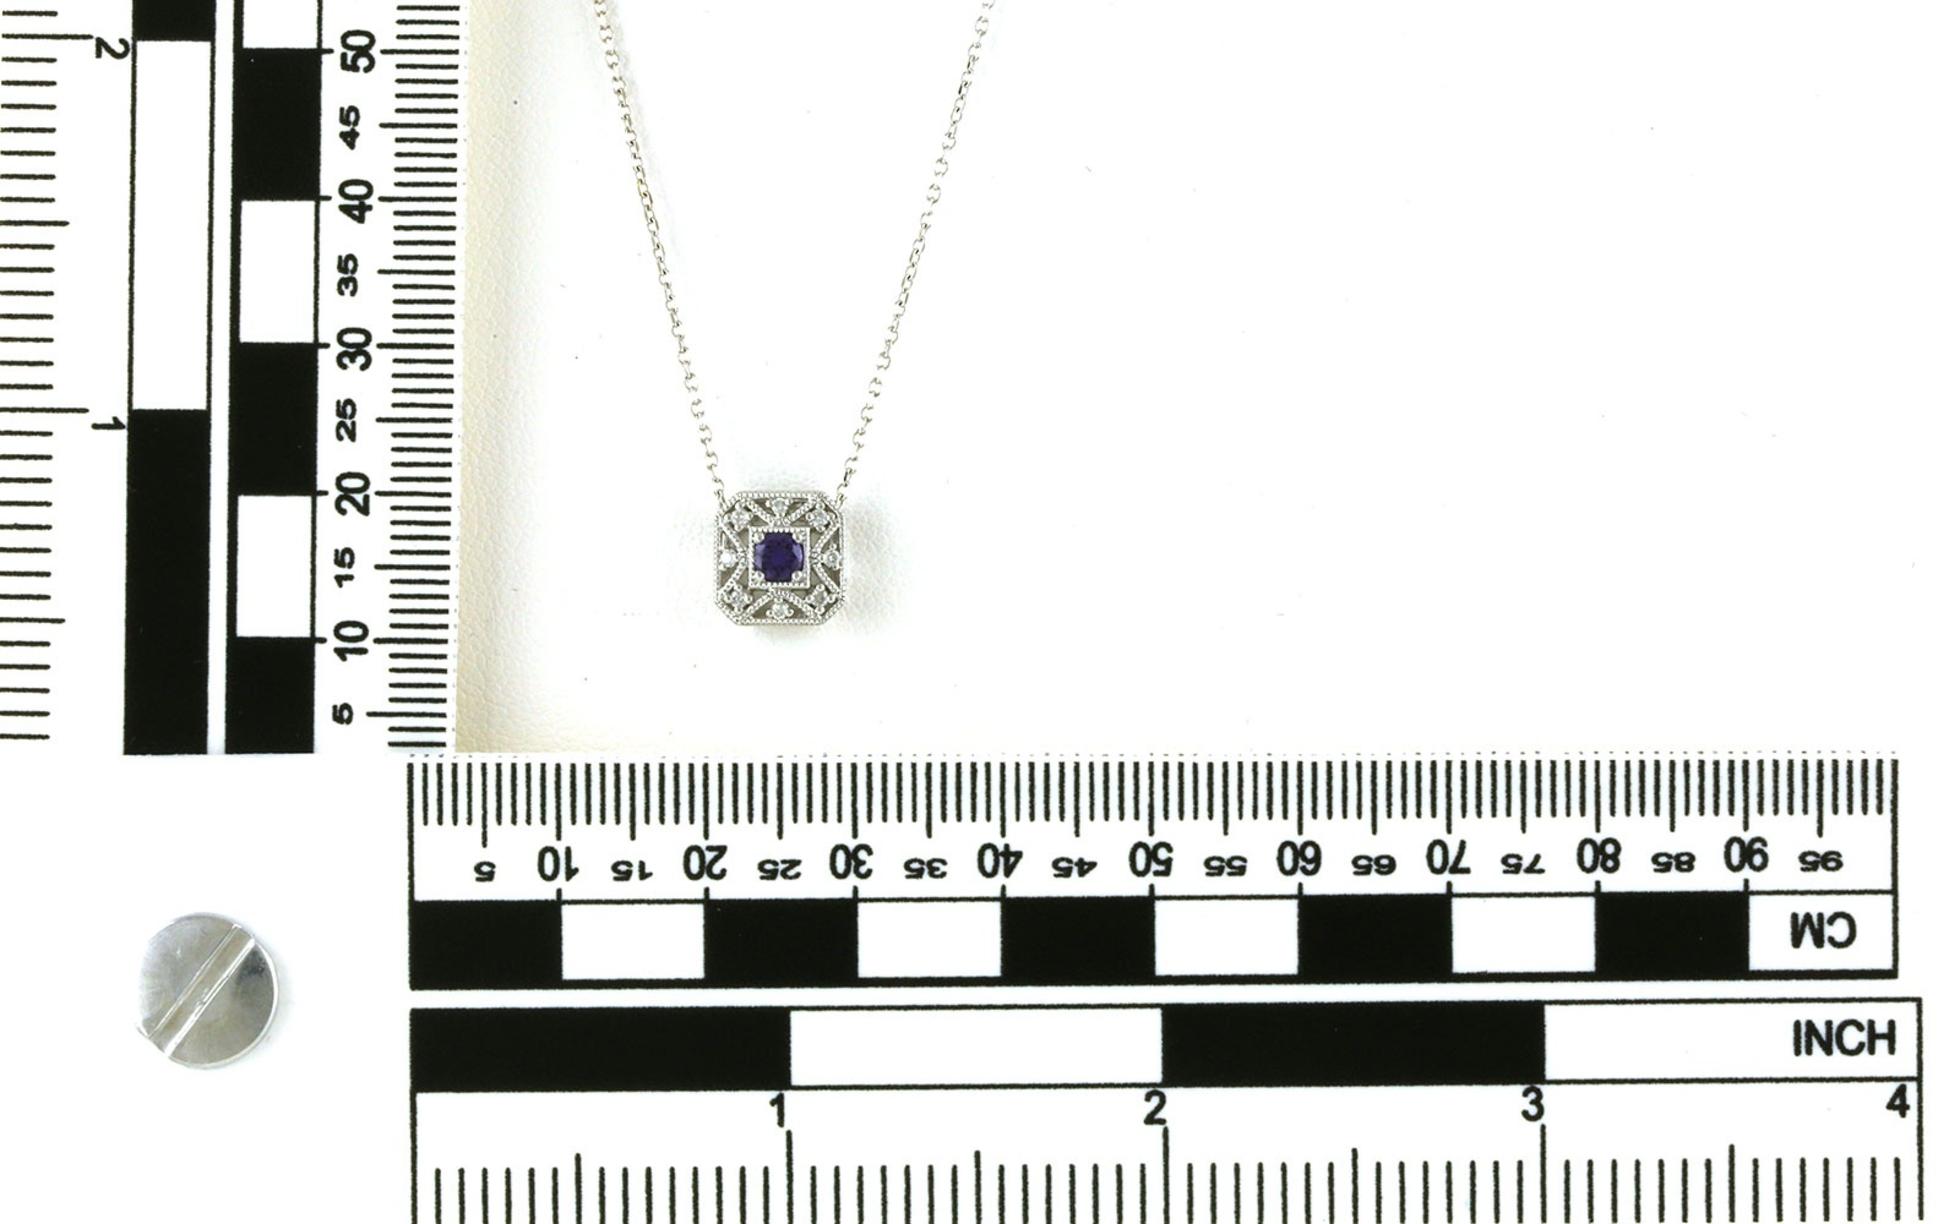 Square Filigree Halo Huckleberry Yogo Sapphire and Diamond Necklace in White Gold (0.22cts TWT) scale